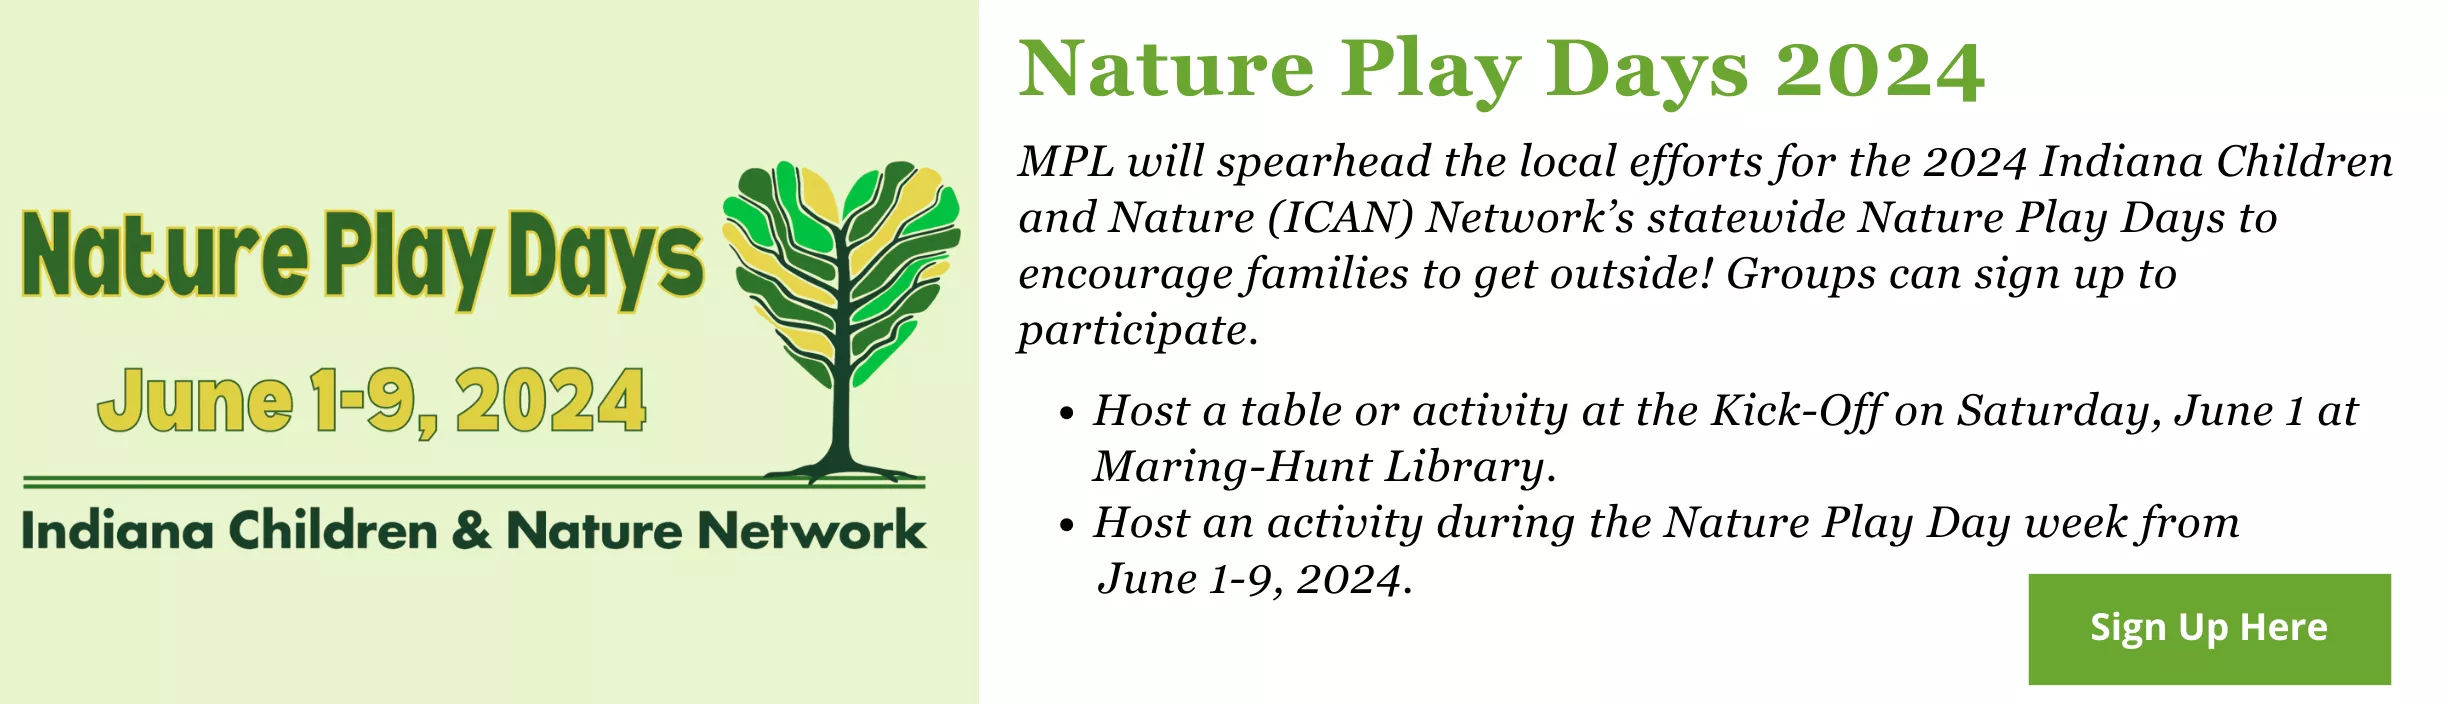 Nature Play Days Signup